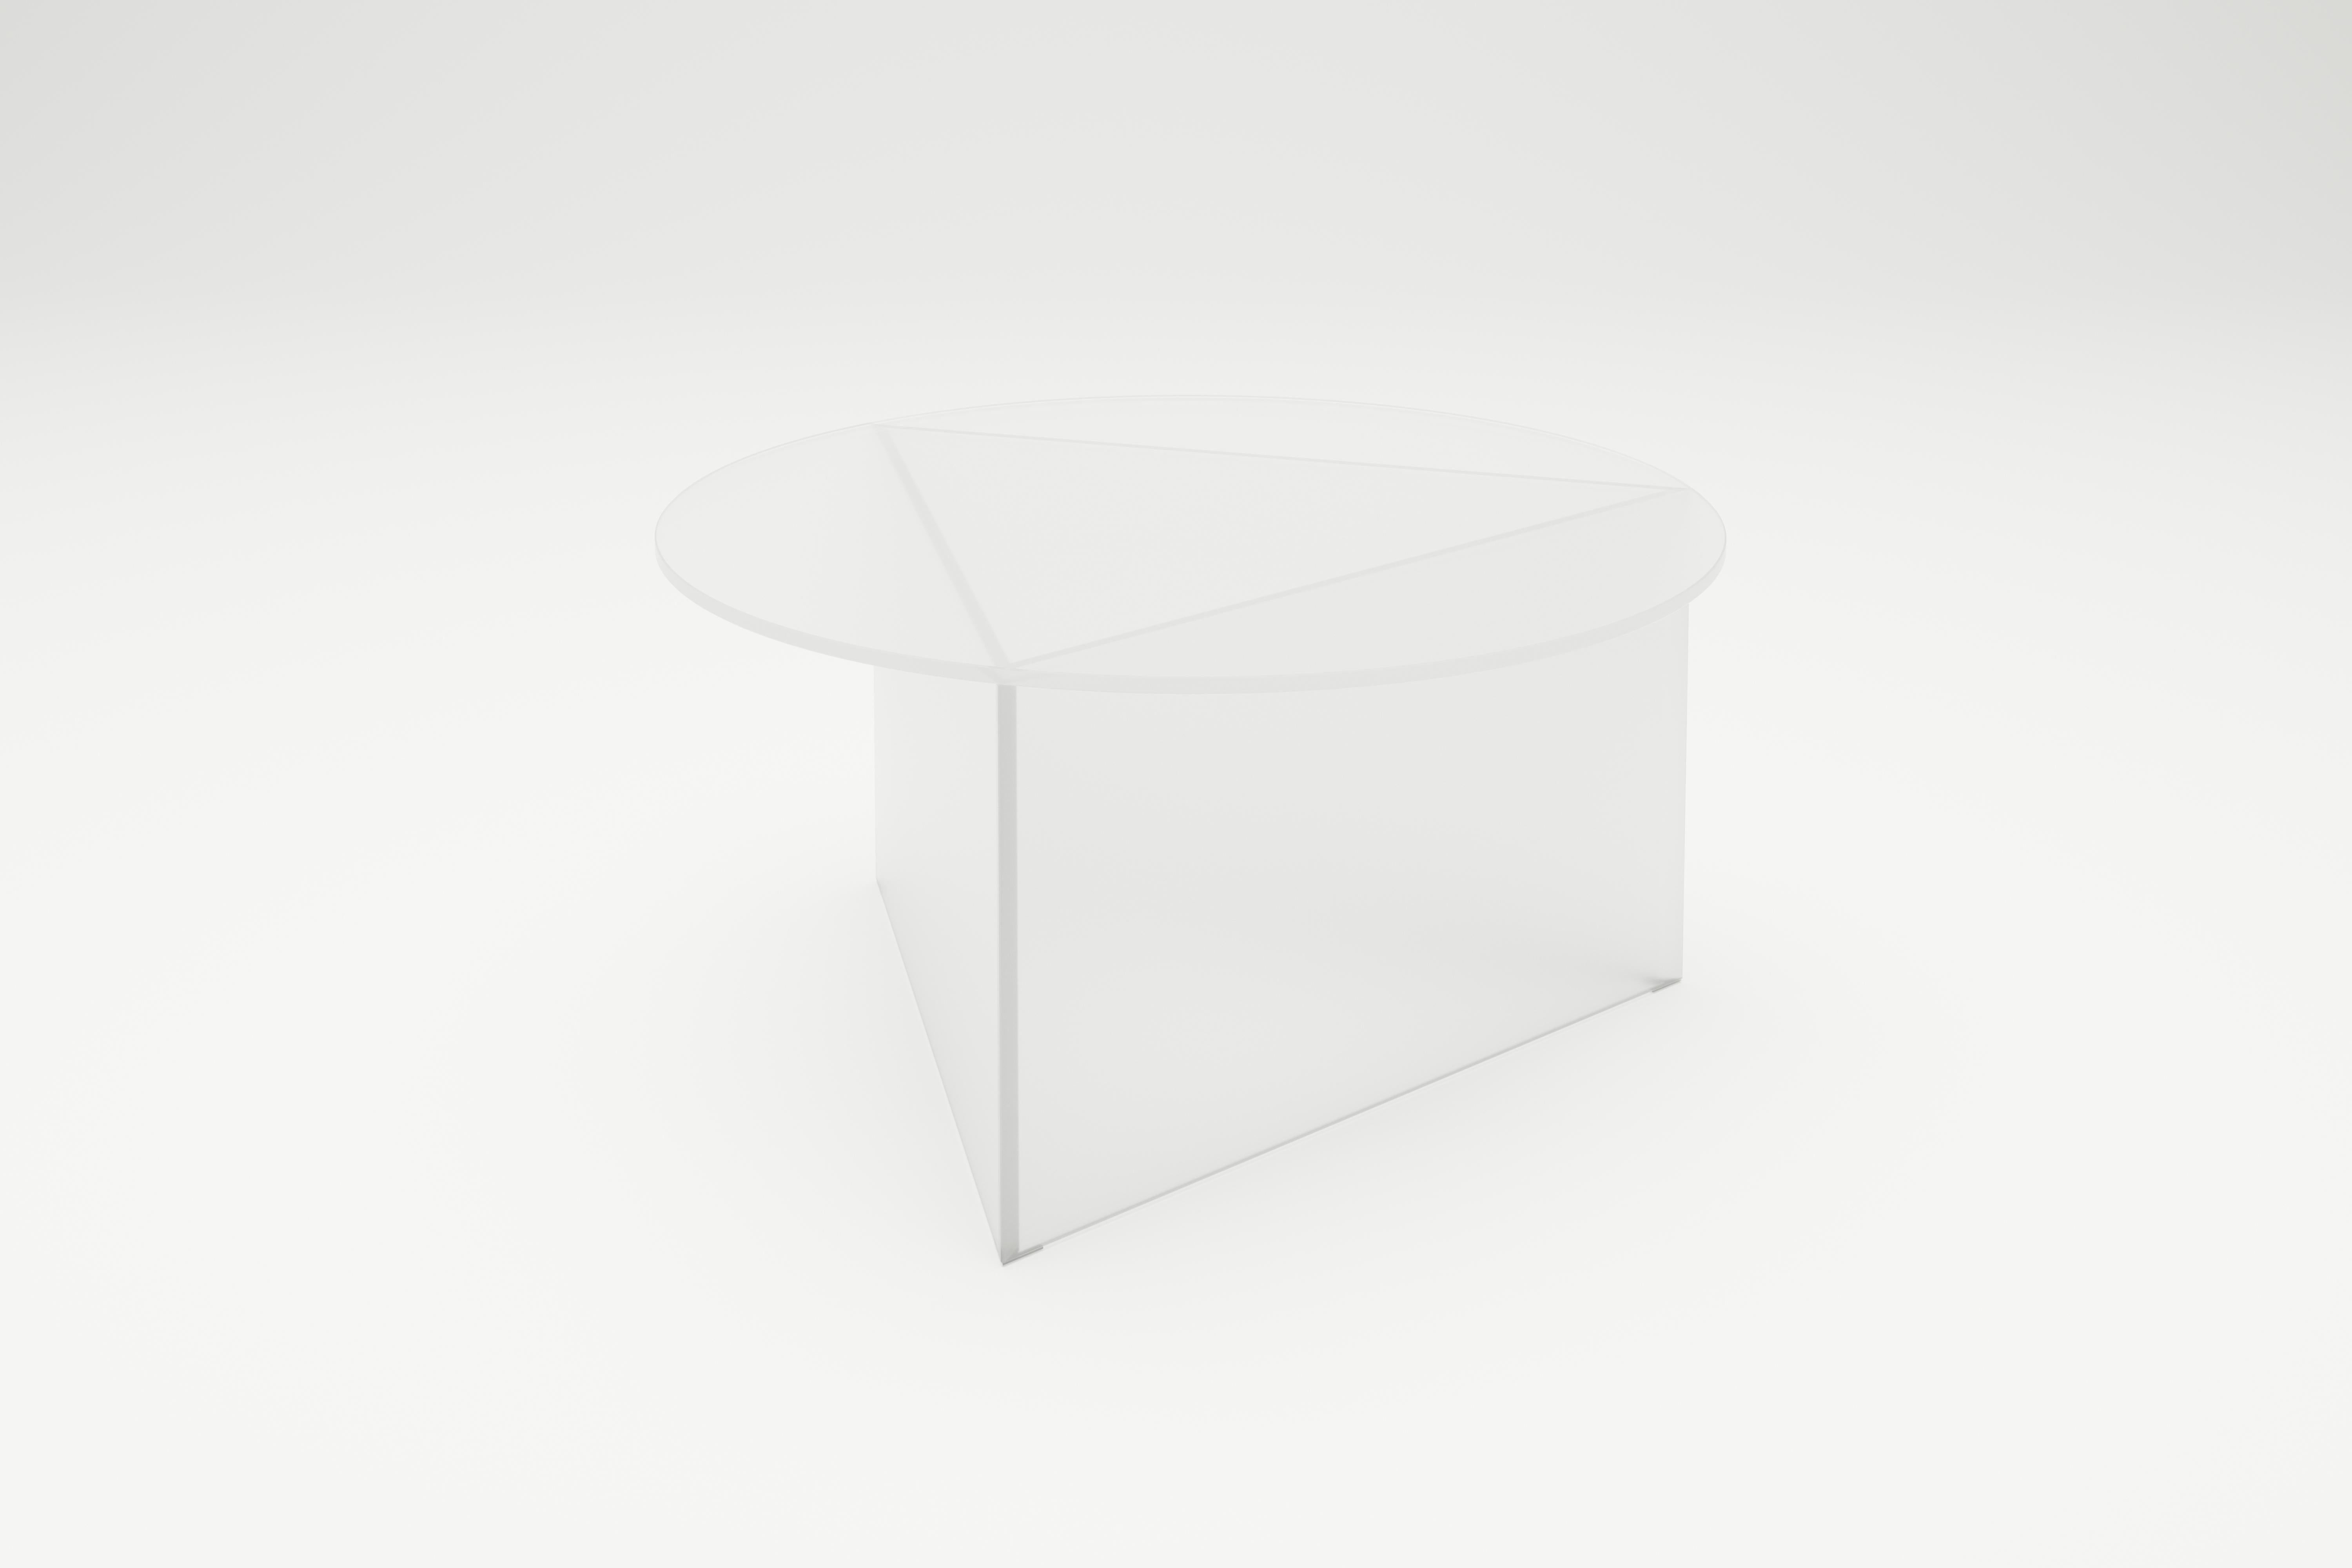 Satin Glass Prisma circle 80 coffe table by Sebastian Scherer.
Dimensions: D80 x H40 cm.
Materials: Solid coloured glass.
Weight: 32.6 kg.
Also available: Glass: clear white / clear green / clear blue / clear bronze / clear black / satin white /